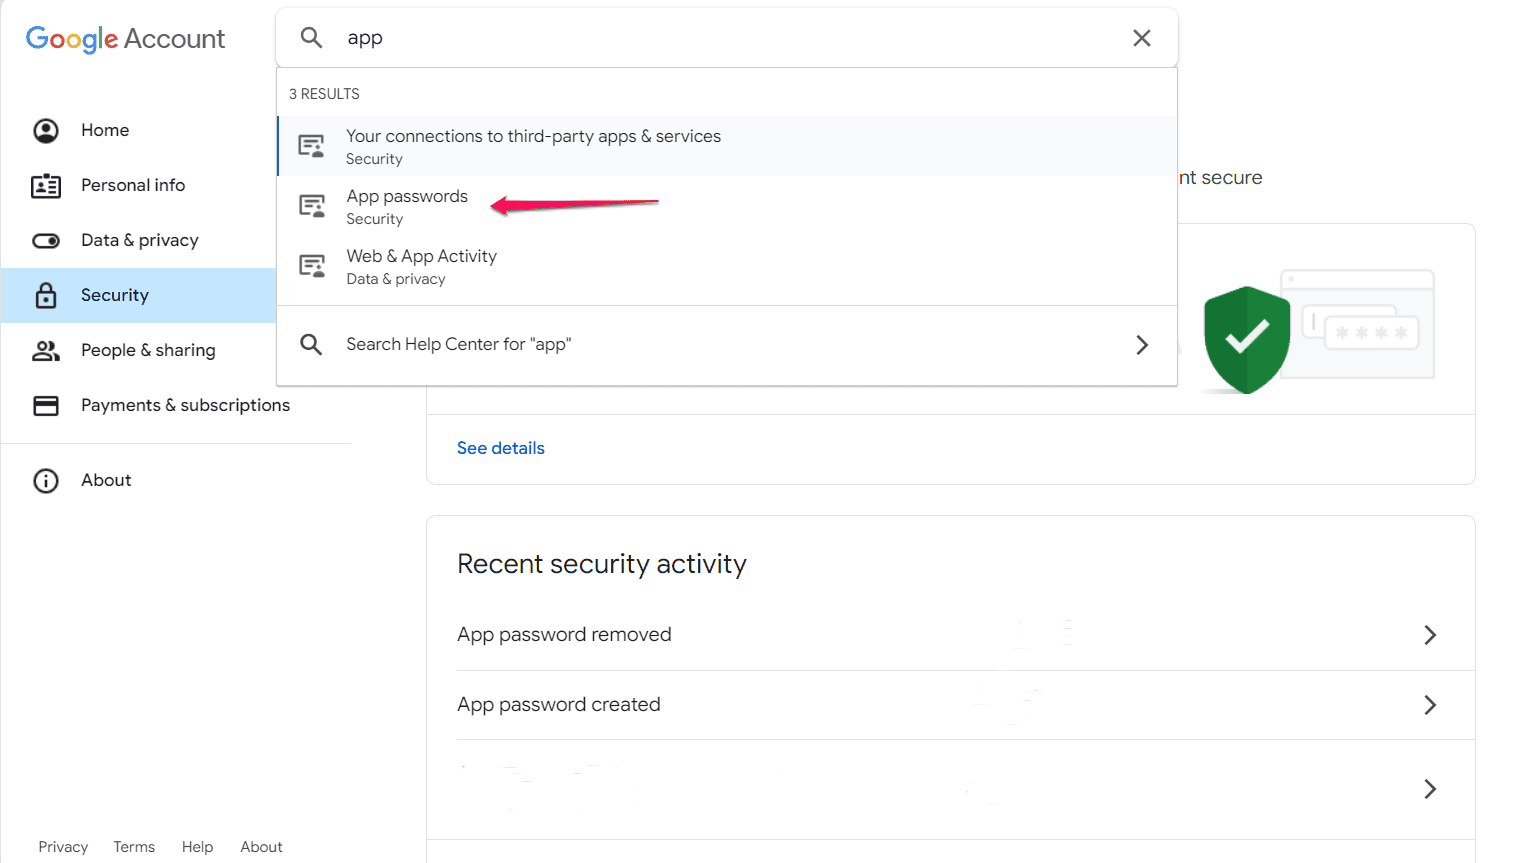 Accessing App Passwords from a Google account